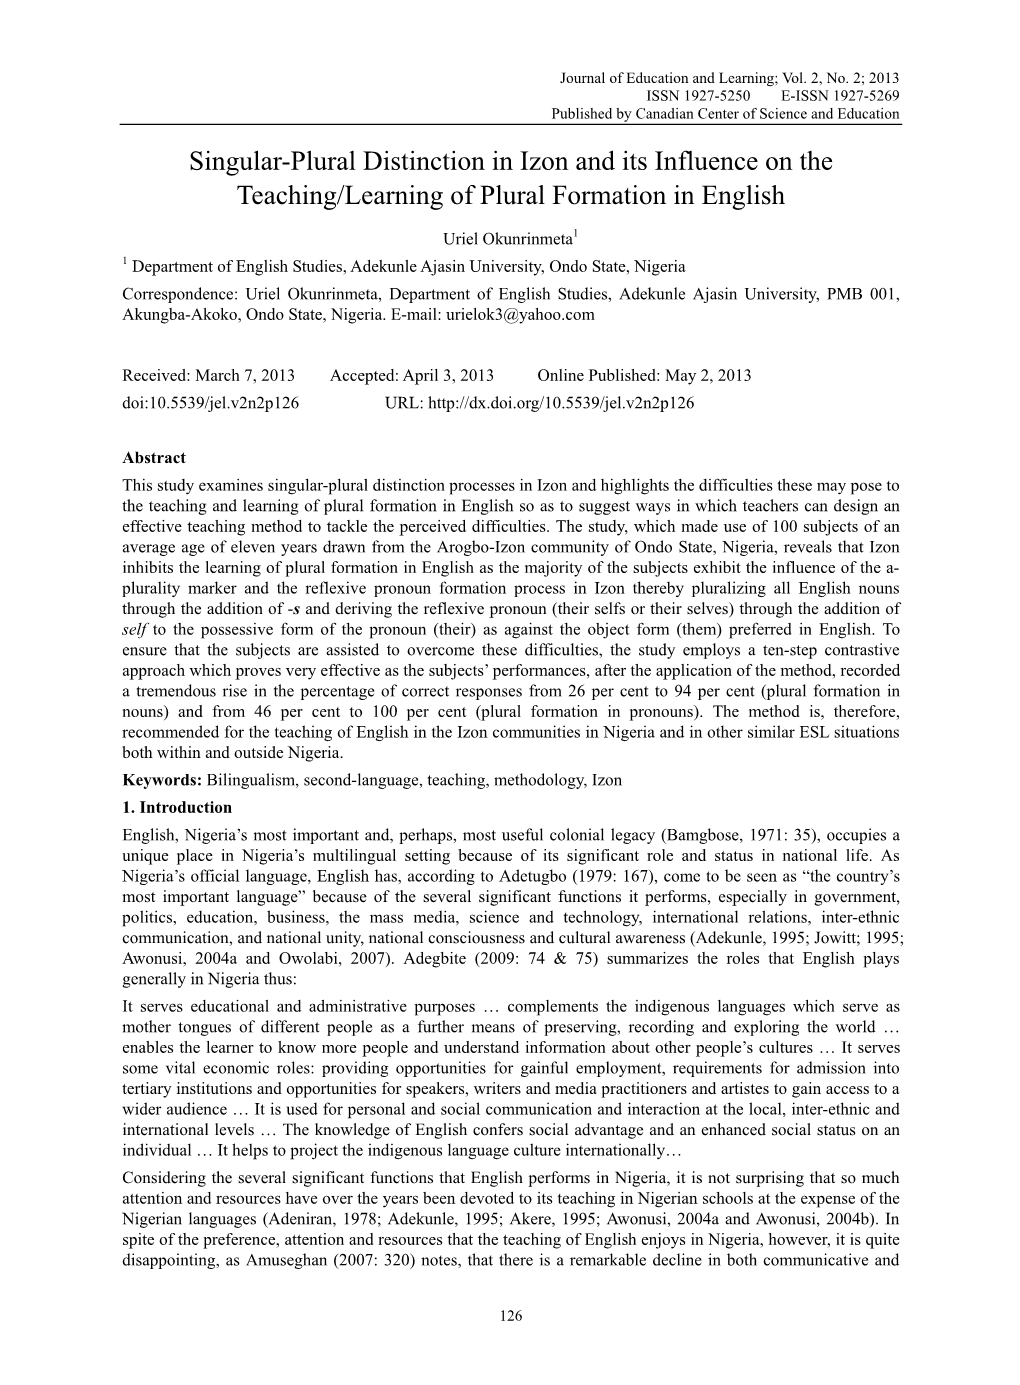 Singular-Plural Distinction in Izon and Its Influence on the Teaching/Learning of Plural Formation in English